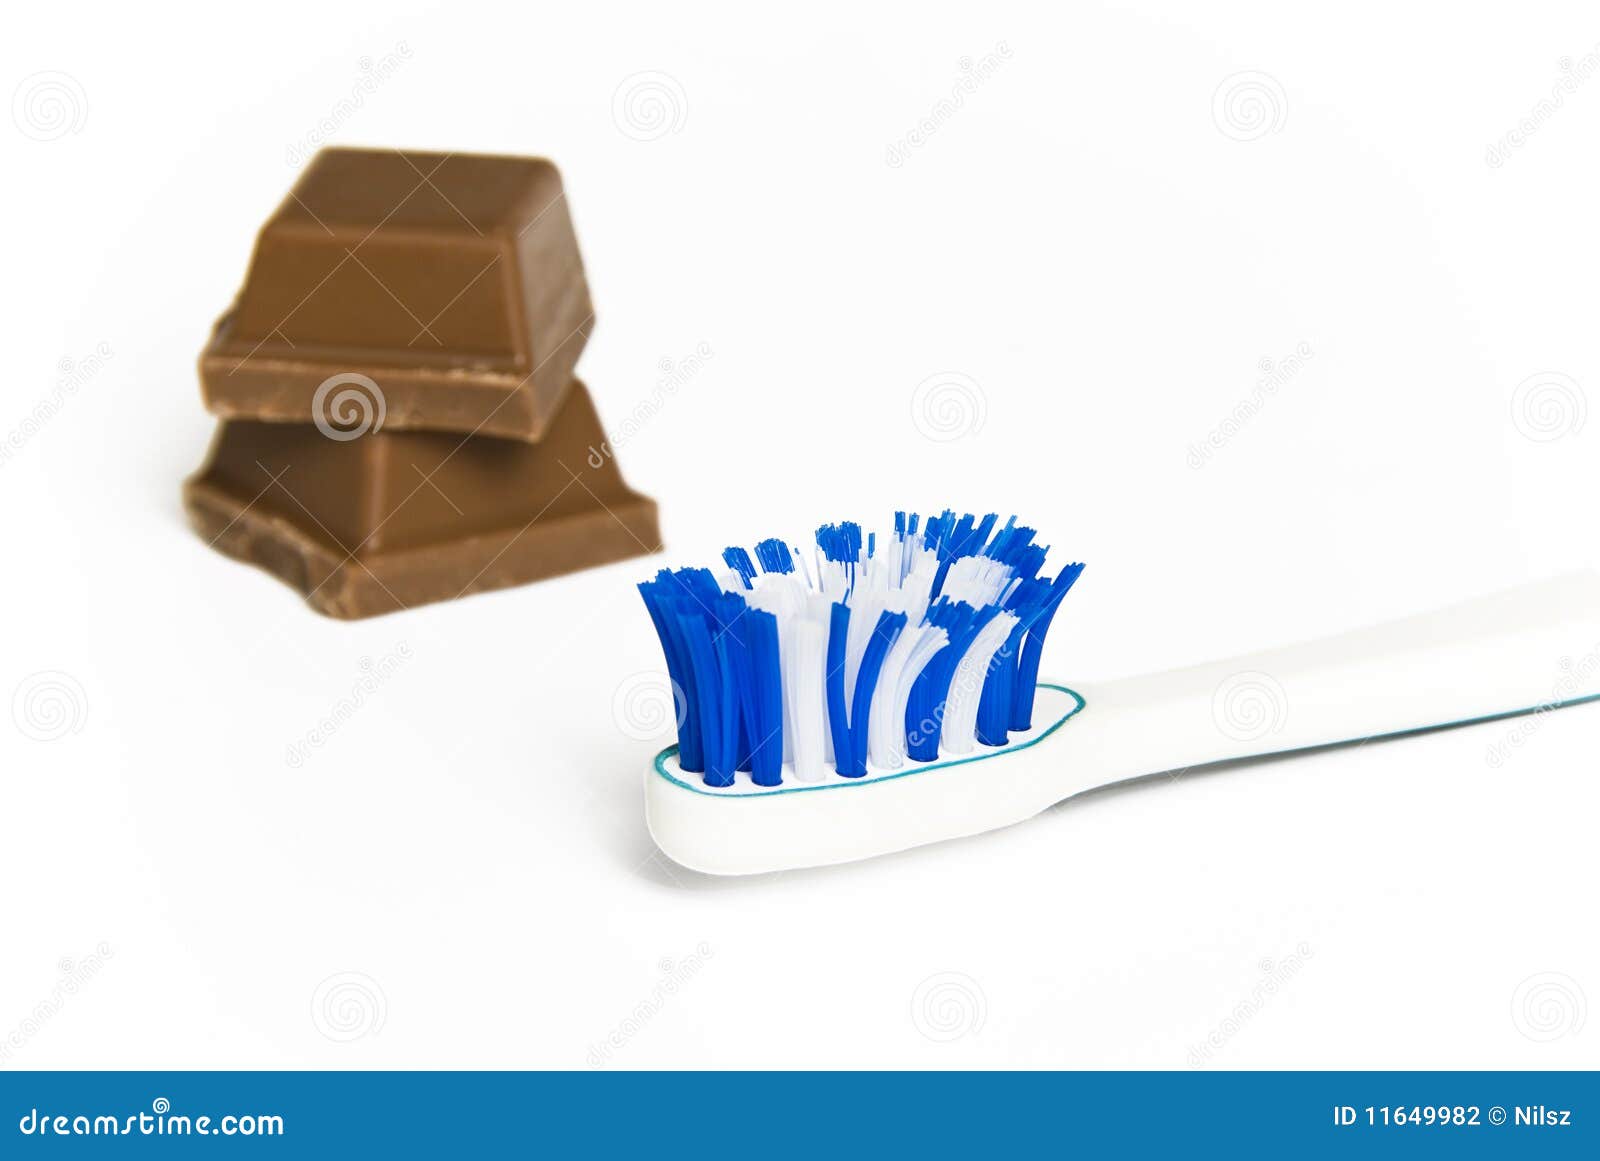 https://thumbs.dreamstime.com/z/toothbrush-together-sweet-chocolate-11649982.jpg